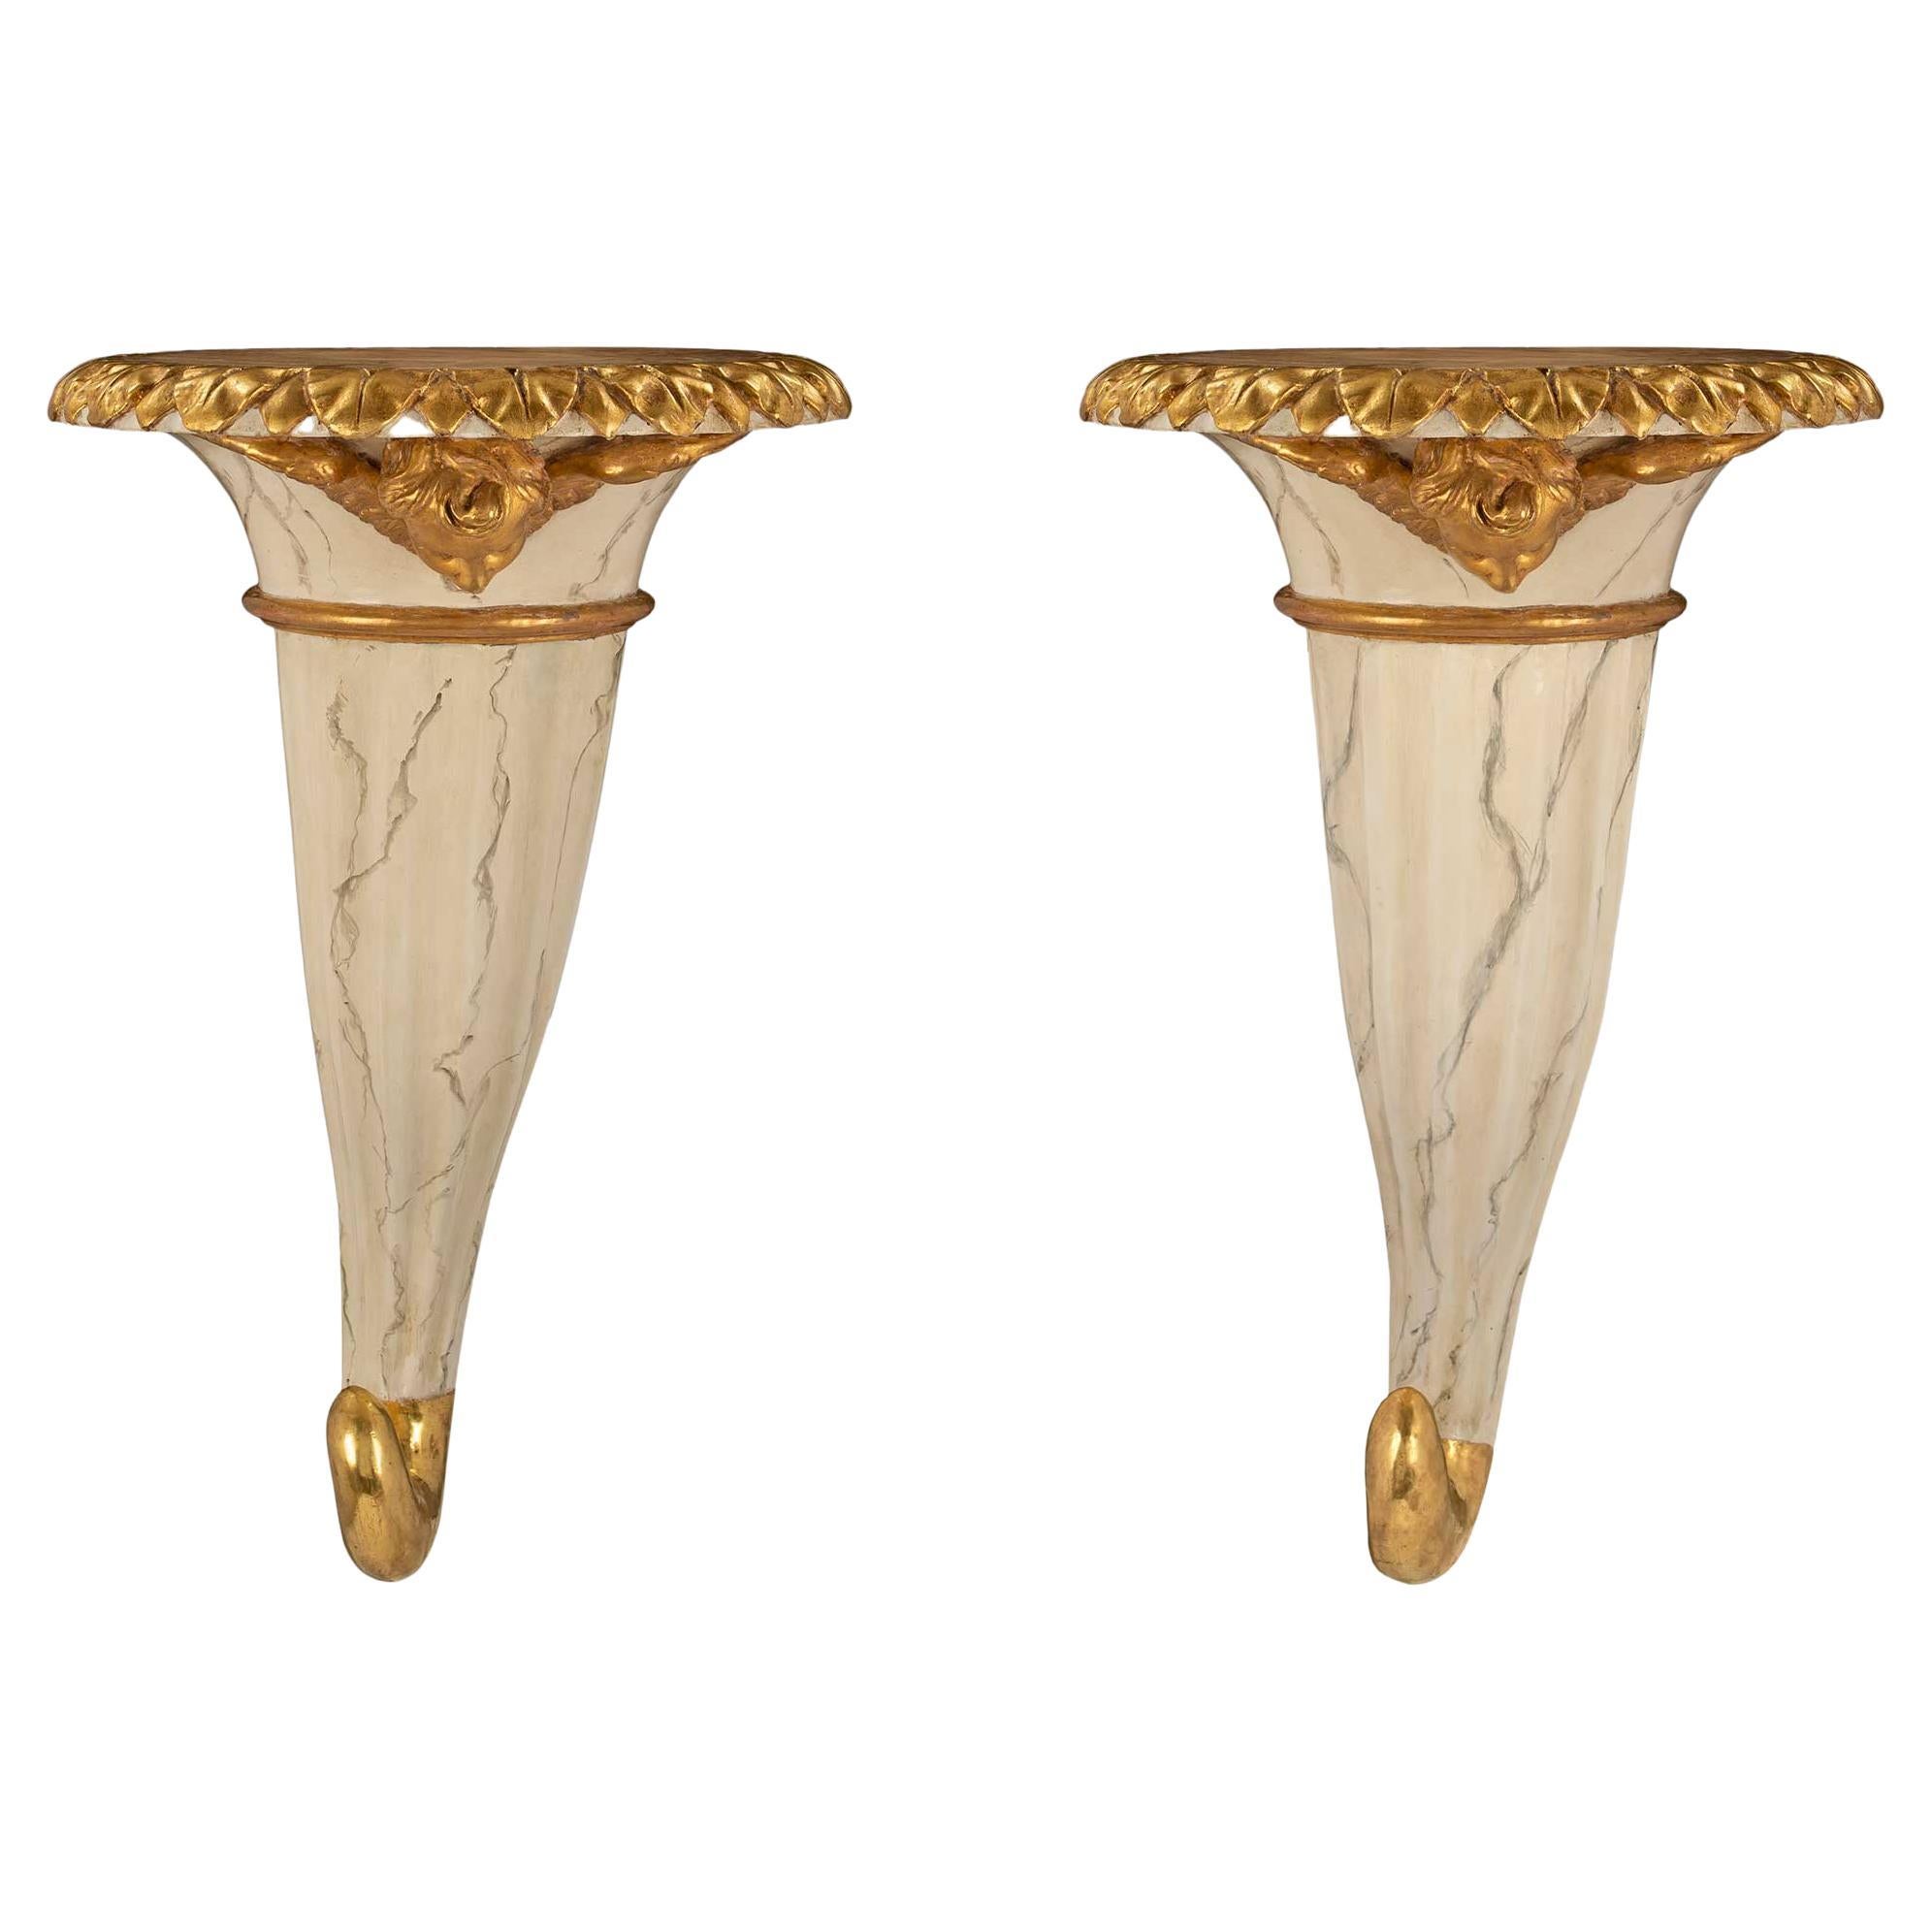 Italian Mid-18th Century Venetian Faux Marble and Giltwood Wall Brackets For Sale